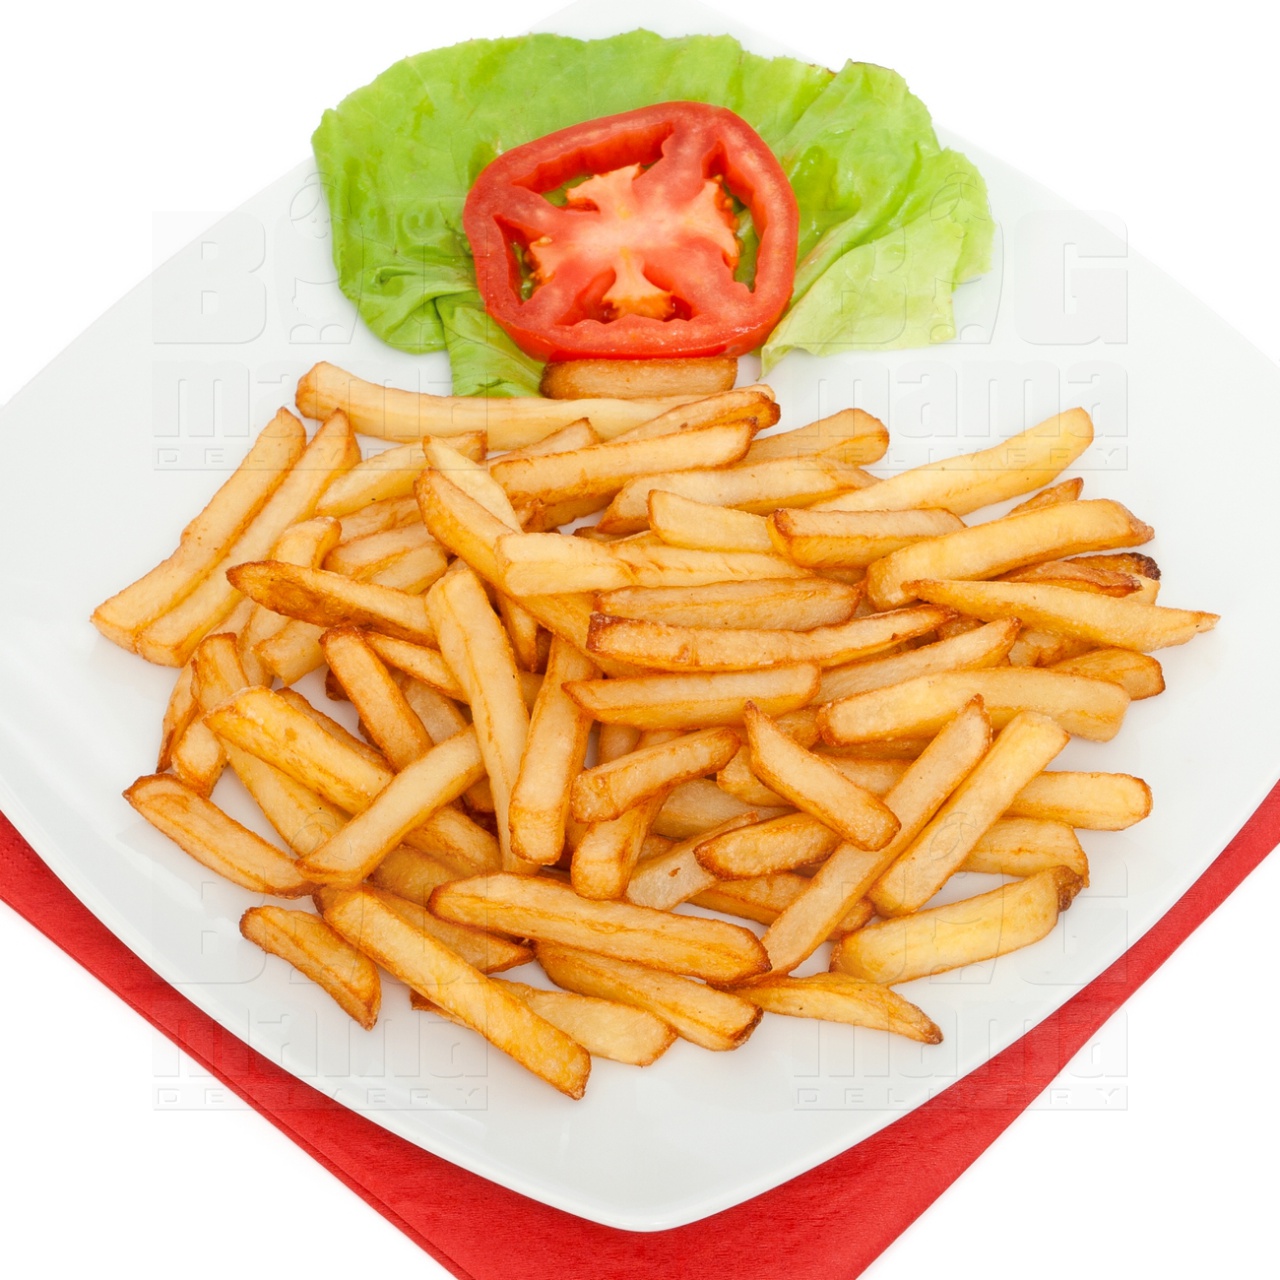 Product #177 image - French fries, half portion